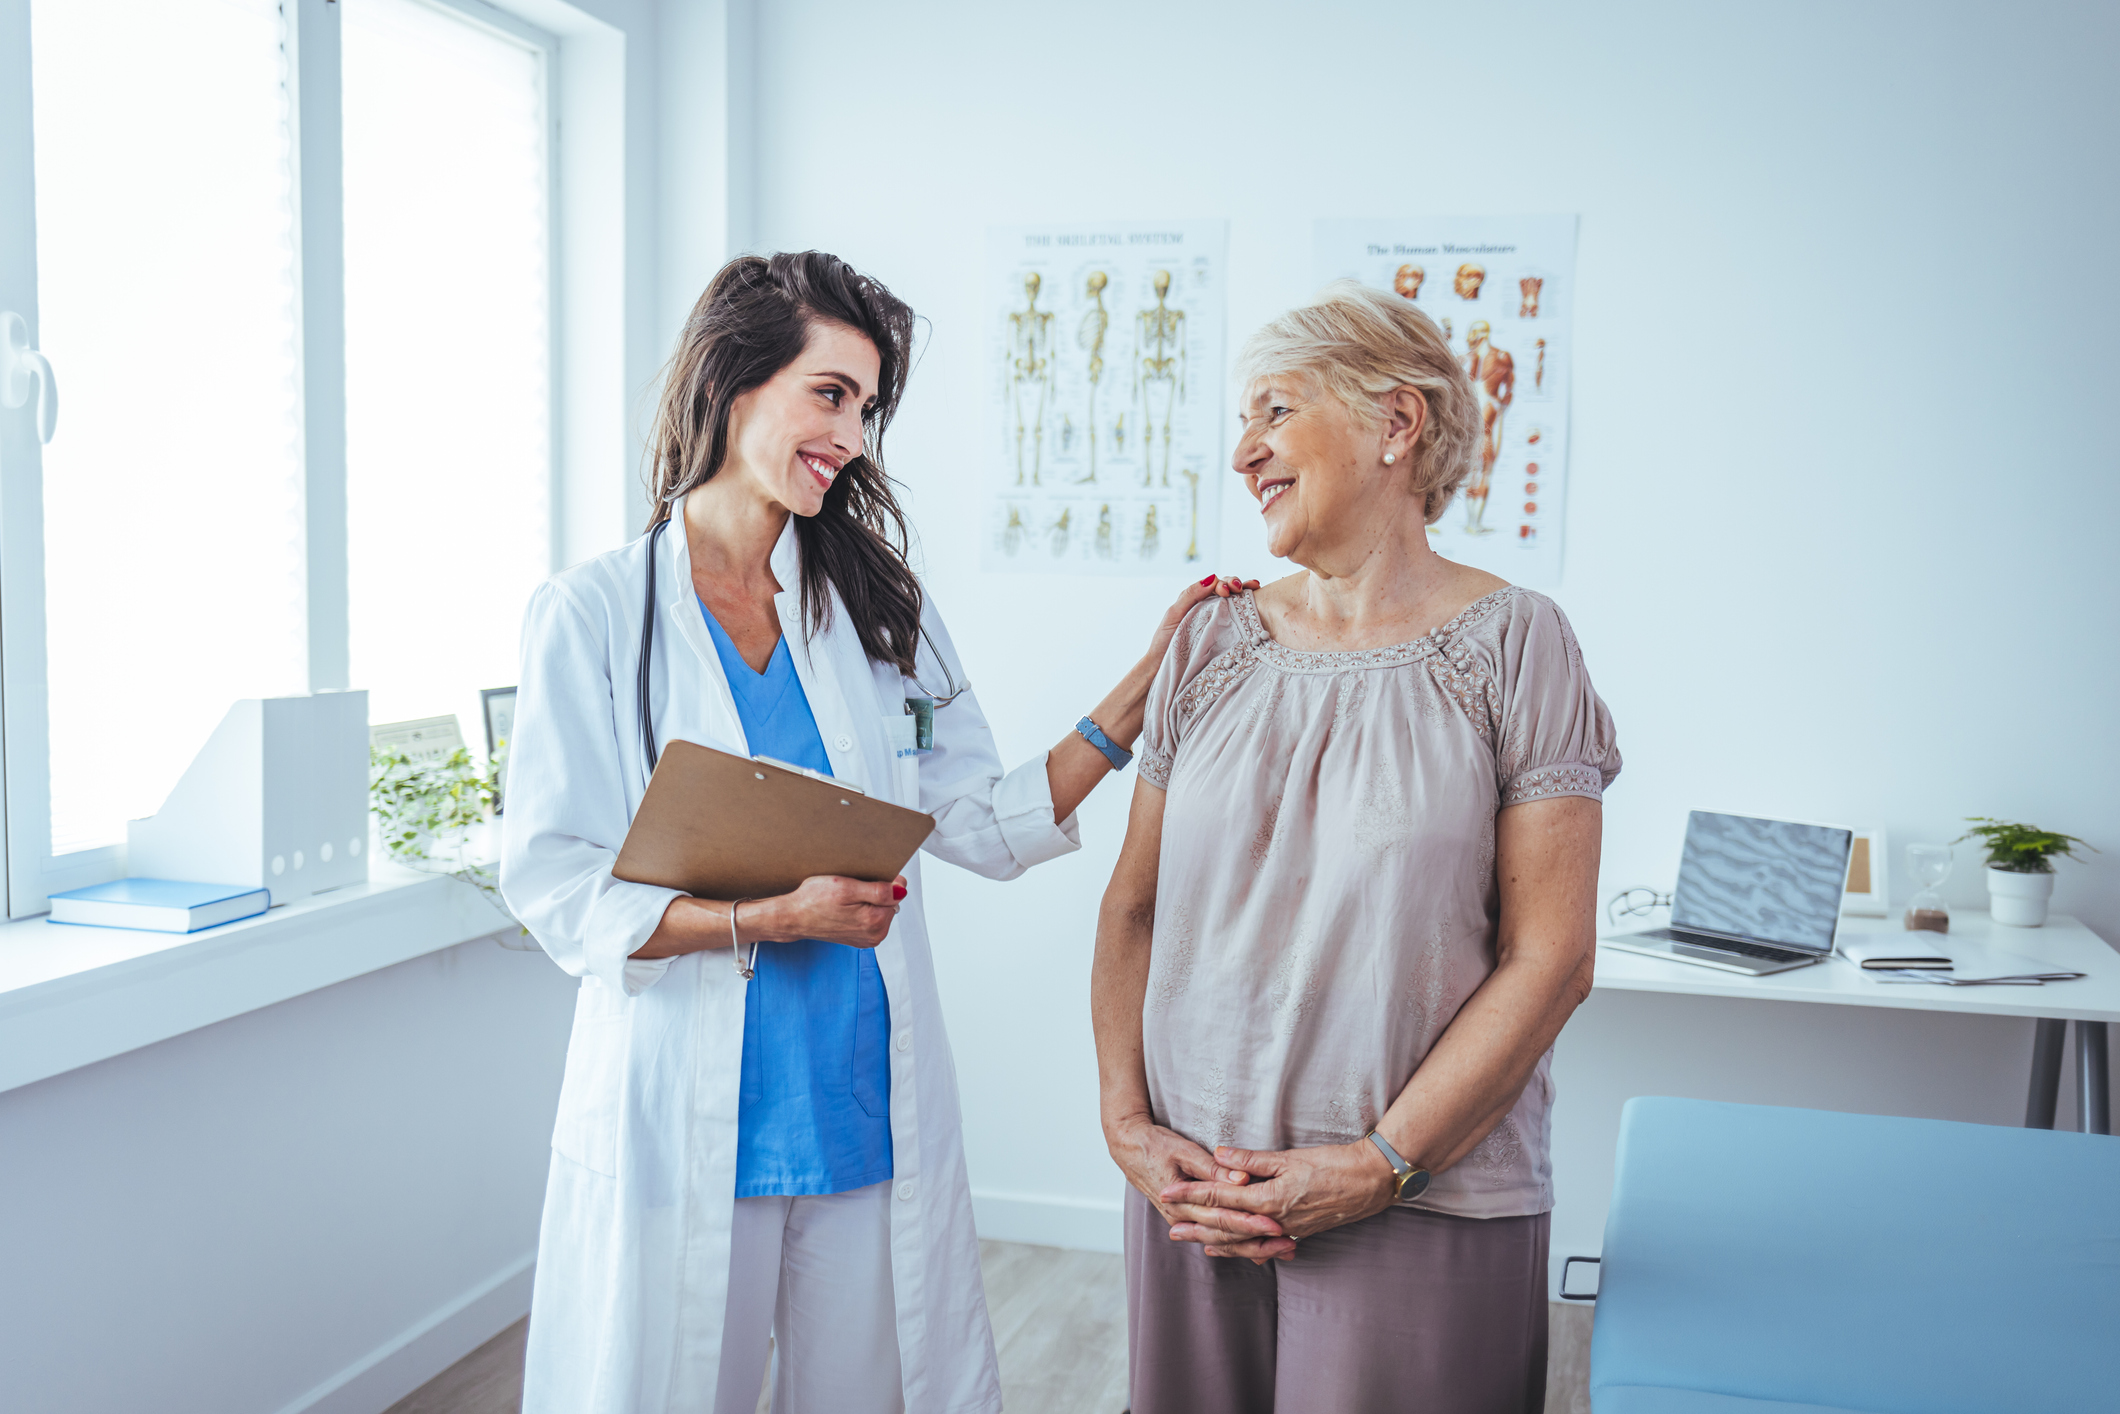 Female Senior Patient smiles while discussing medical history with her Female Doctor.